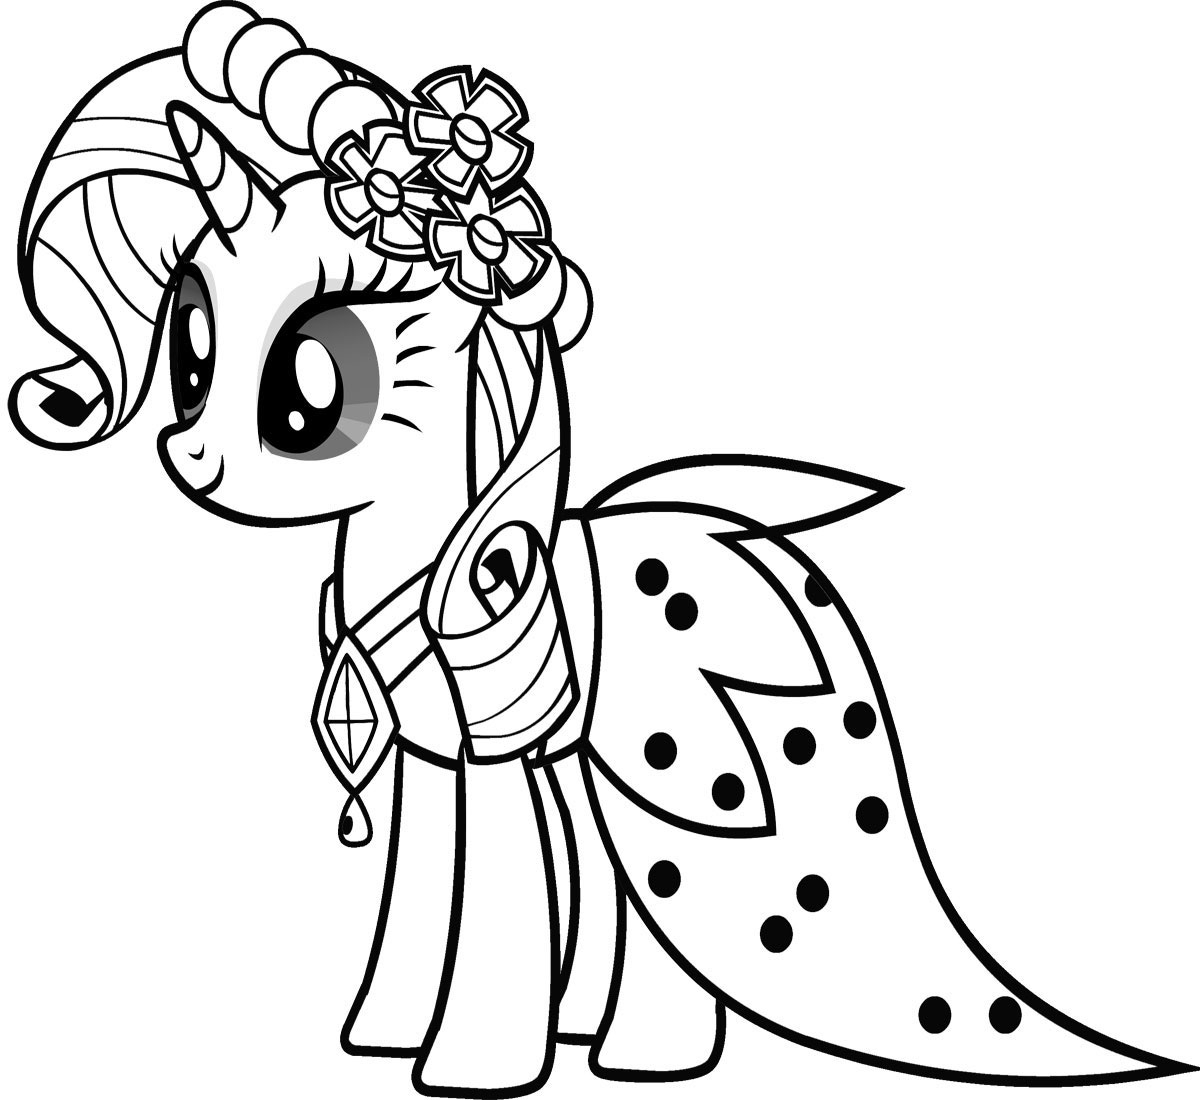 Mlp Coloring Pages Rarity Free Printable My Little Pony Coloring Pages For Kids